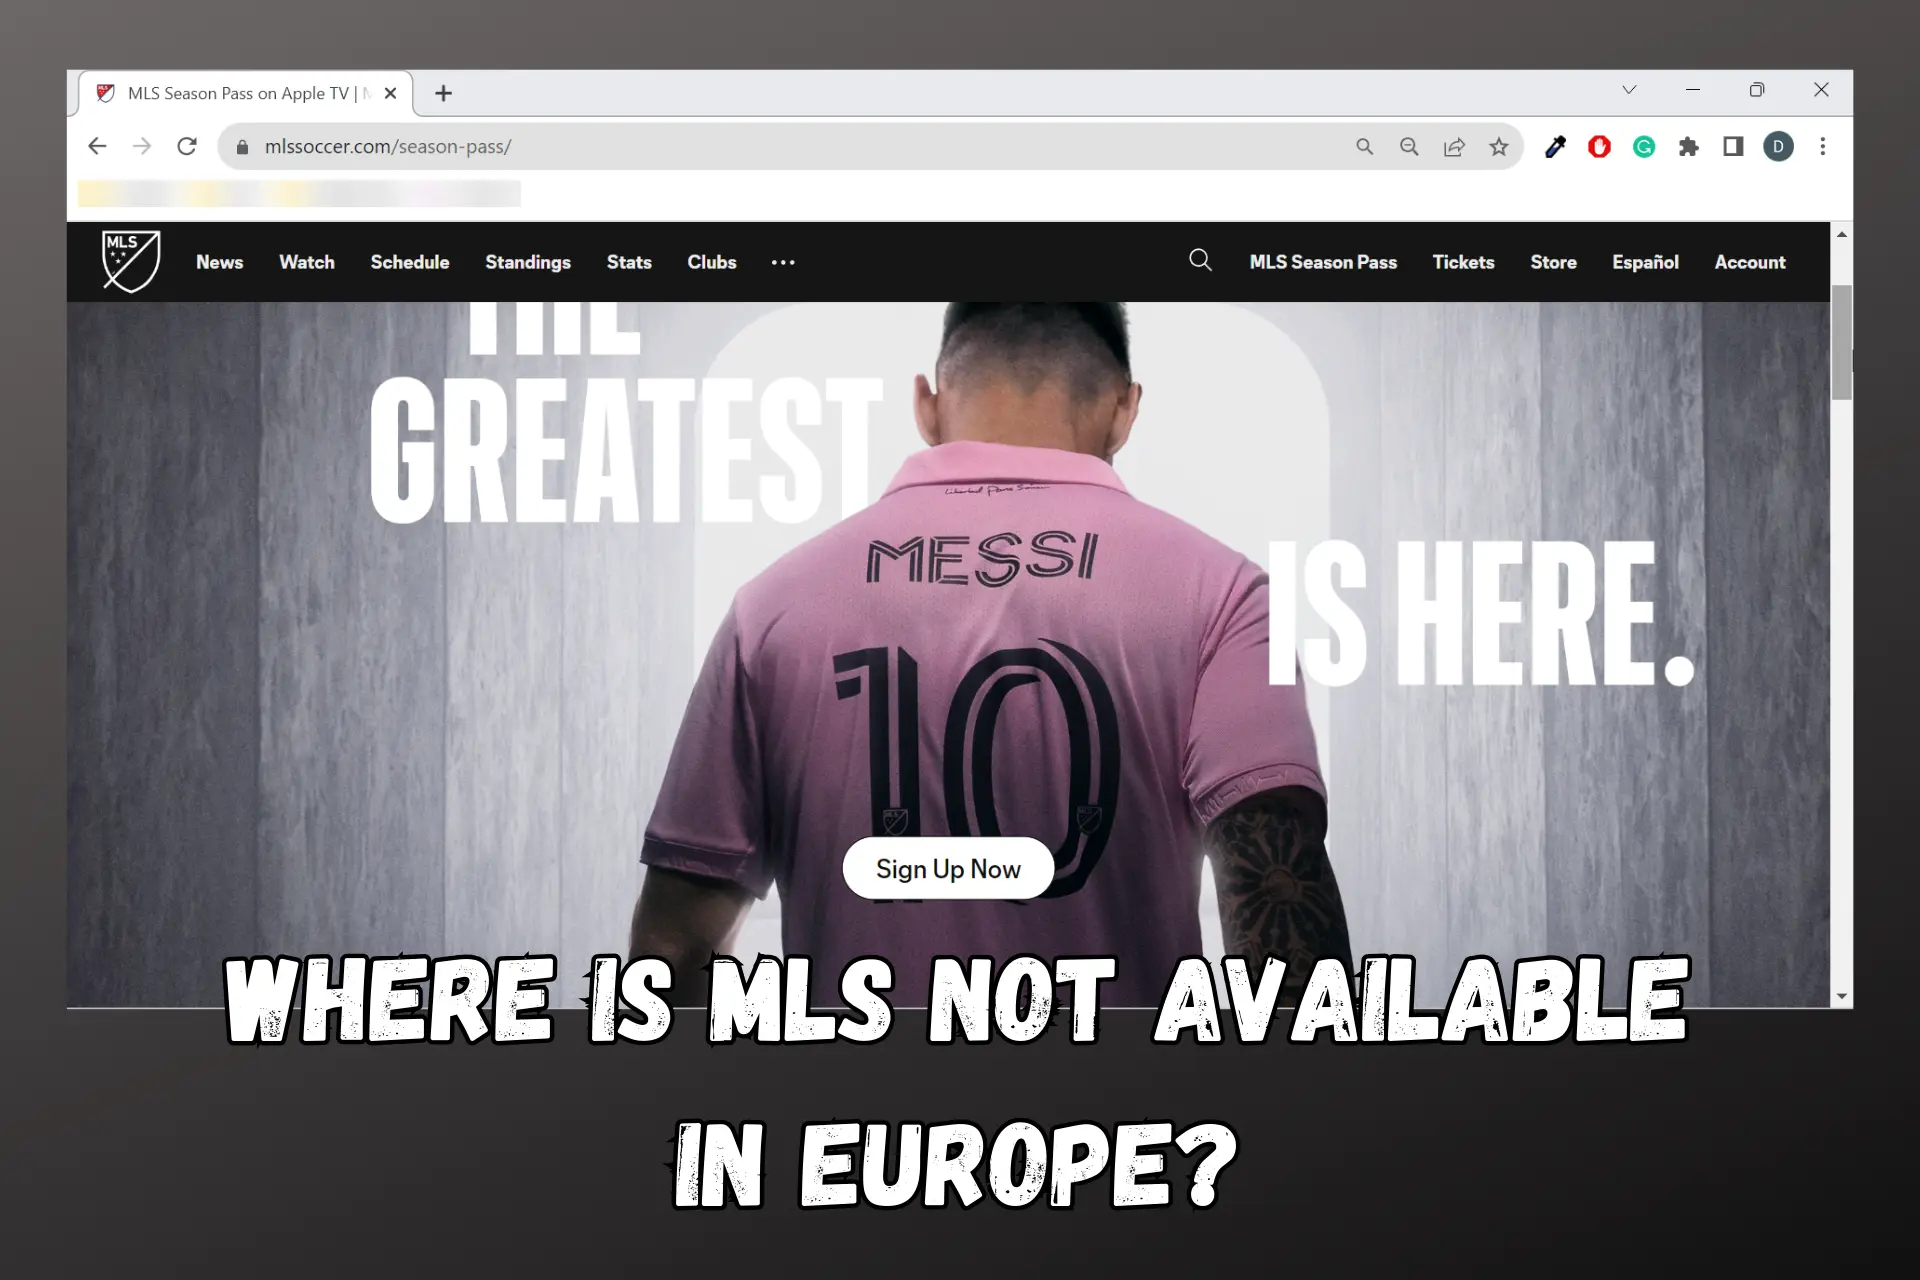 WHERE IS MLS NOT AVAILABLE IN EUROPE